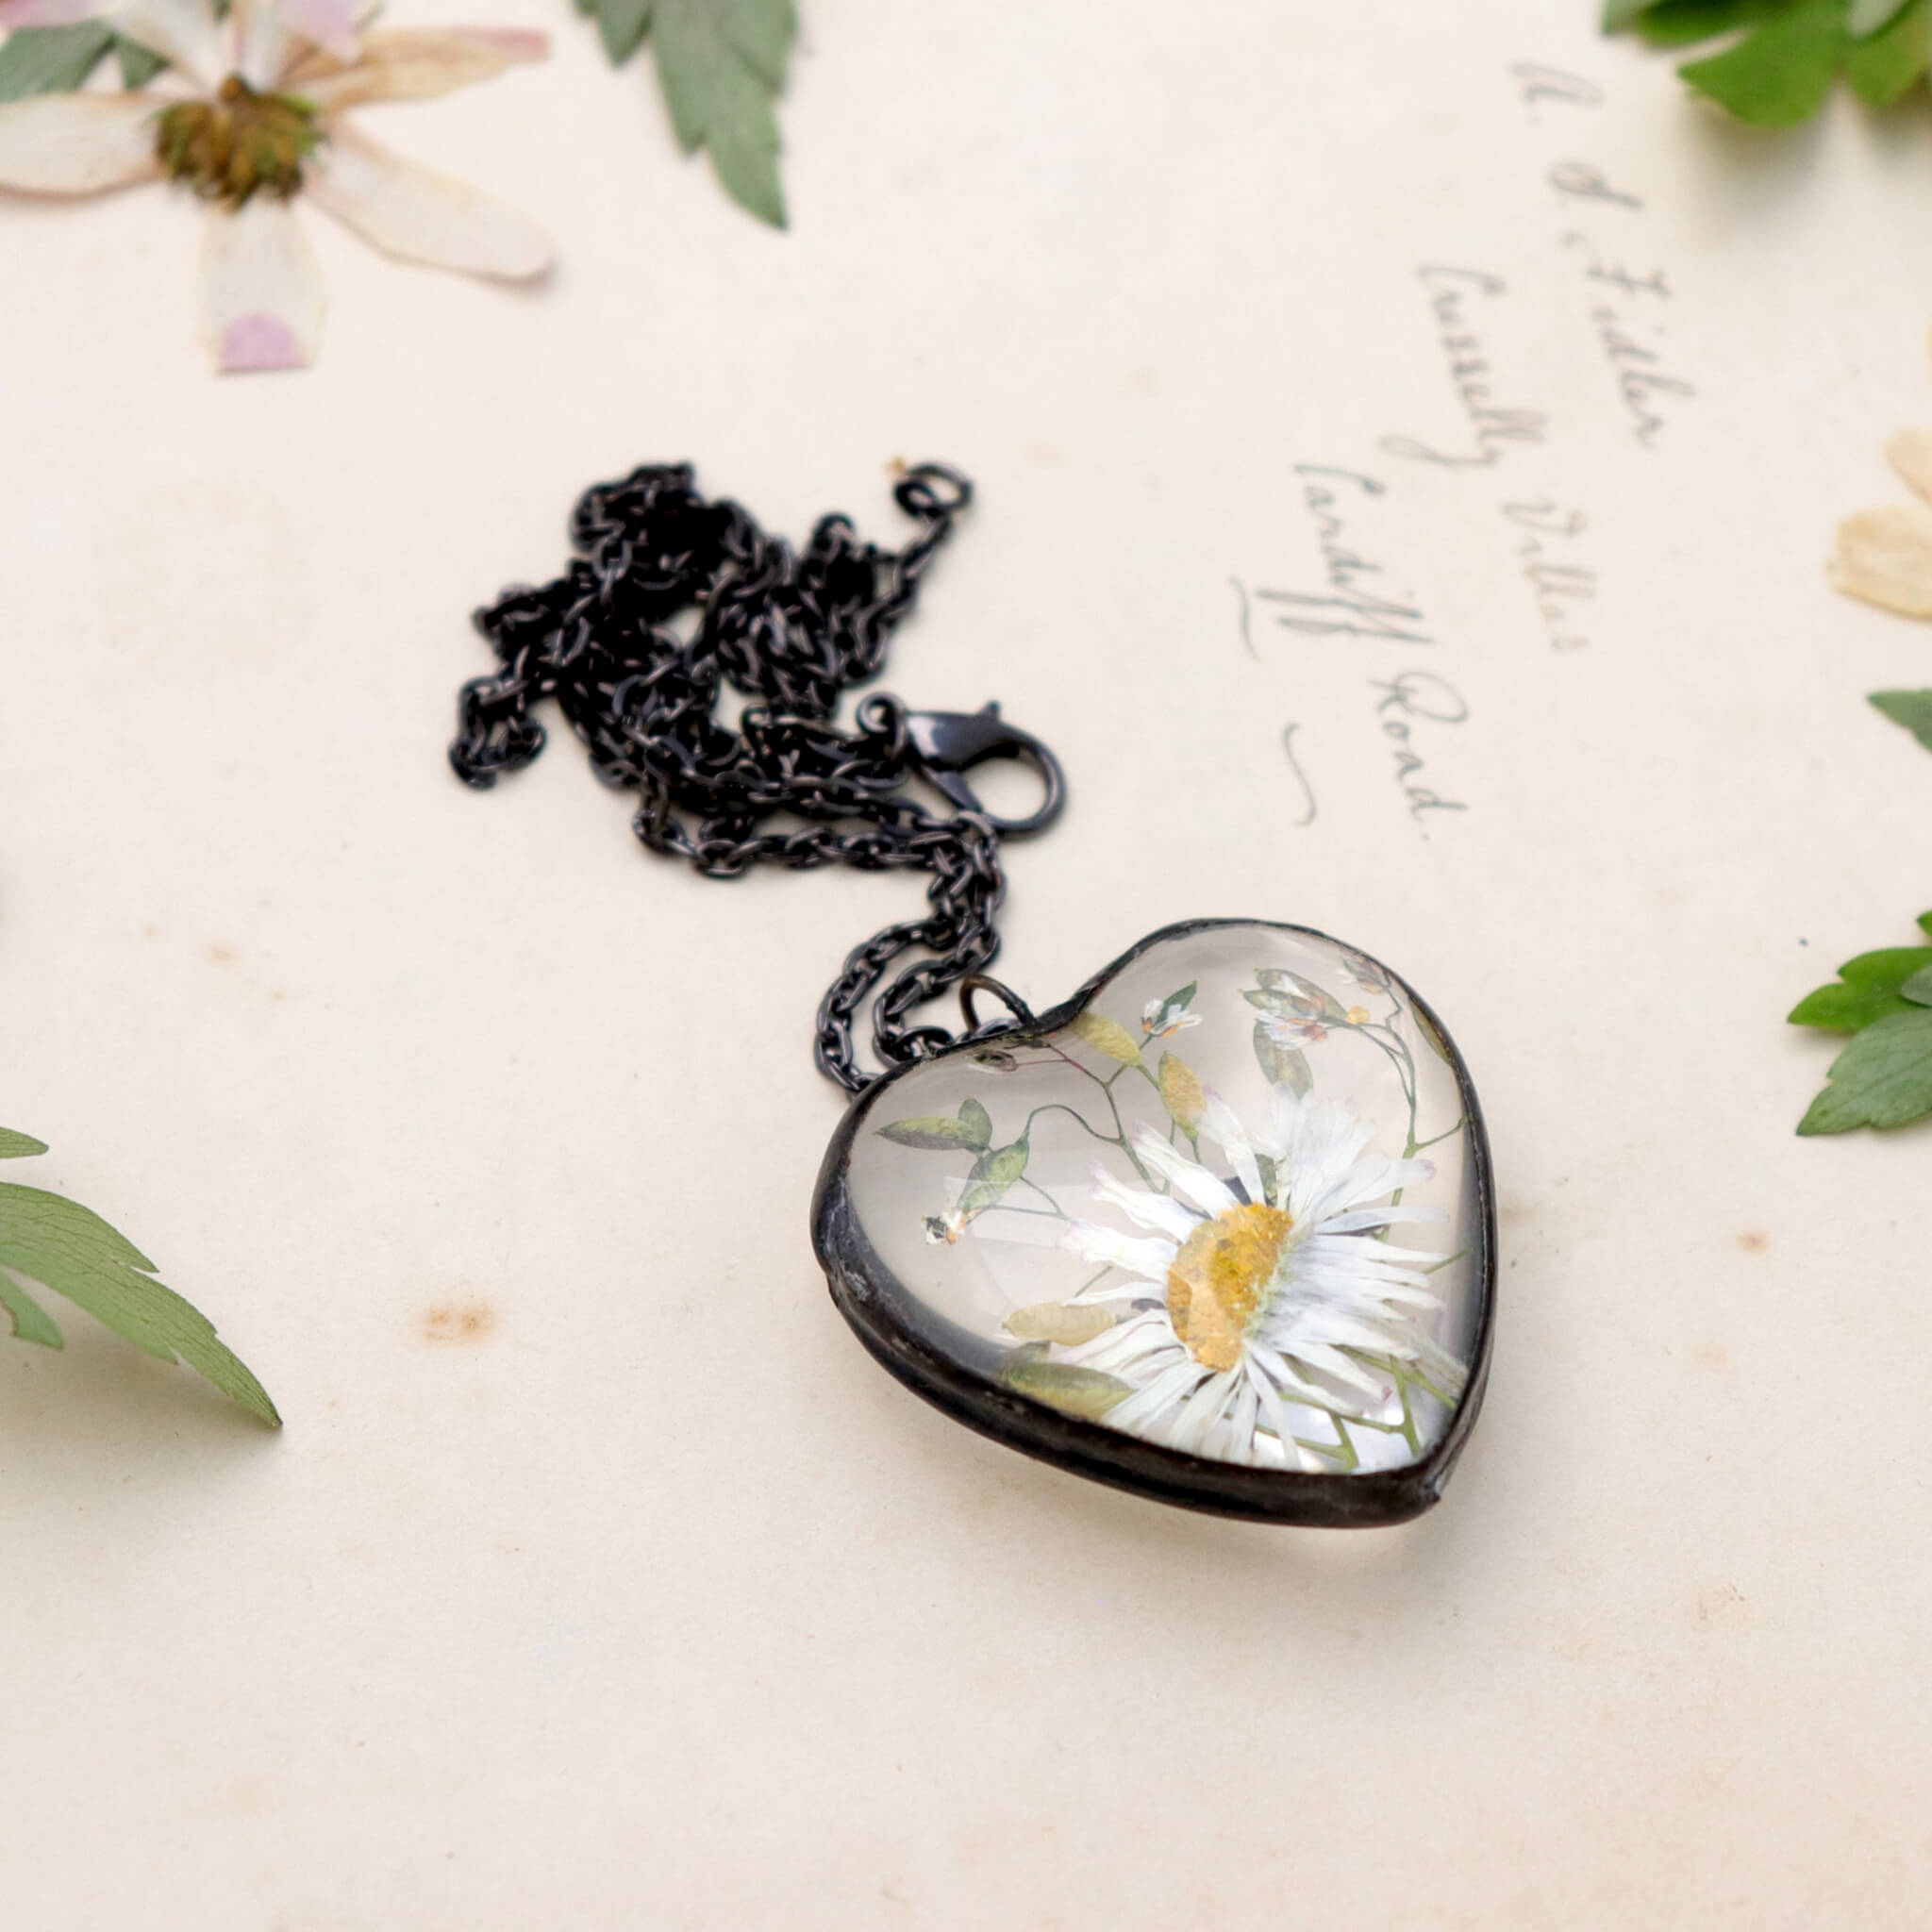 Pressed daisy necklace in heart shape lying on an old paper. Pressed anemones around